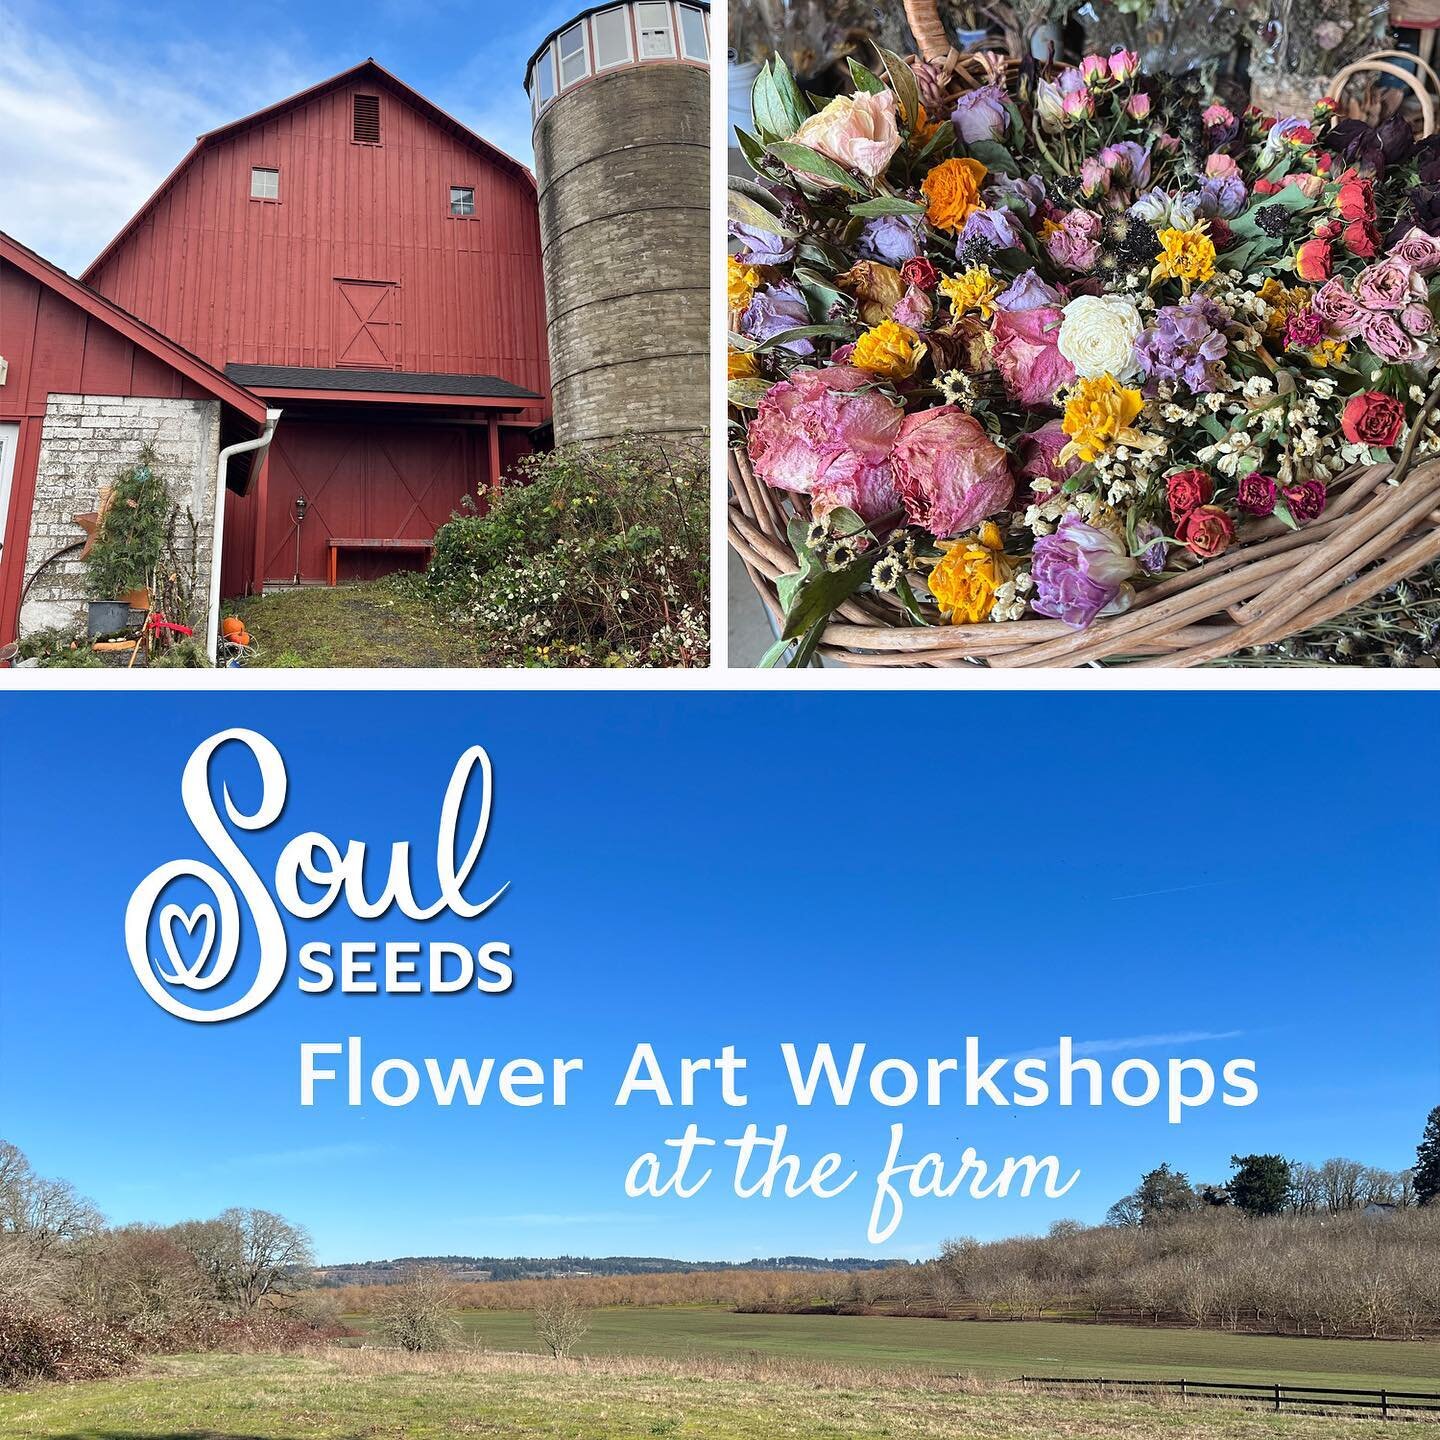 Events are on the calendar and you can grab your spot today!

5/6 - Nature Art and Connection with @groundedalignment 

5/14 - Mothers Day Crowns

5/26 am - Wreath Workshop

5/26 pm - Shadow Box Workshop

5/27 - Nature Art and Connection with @ground